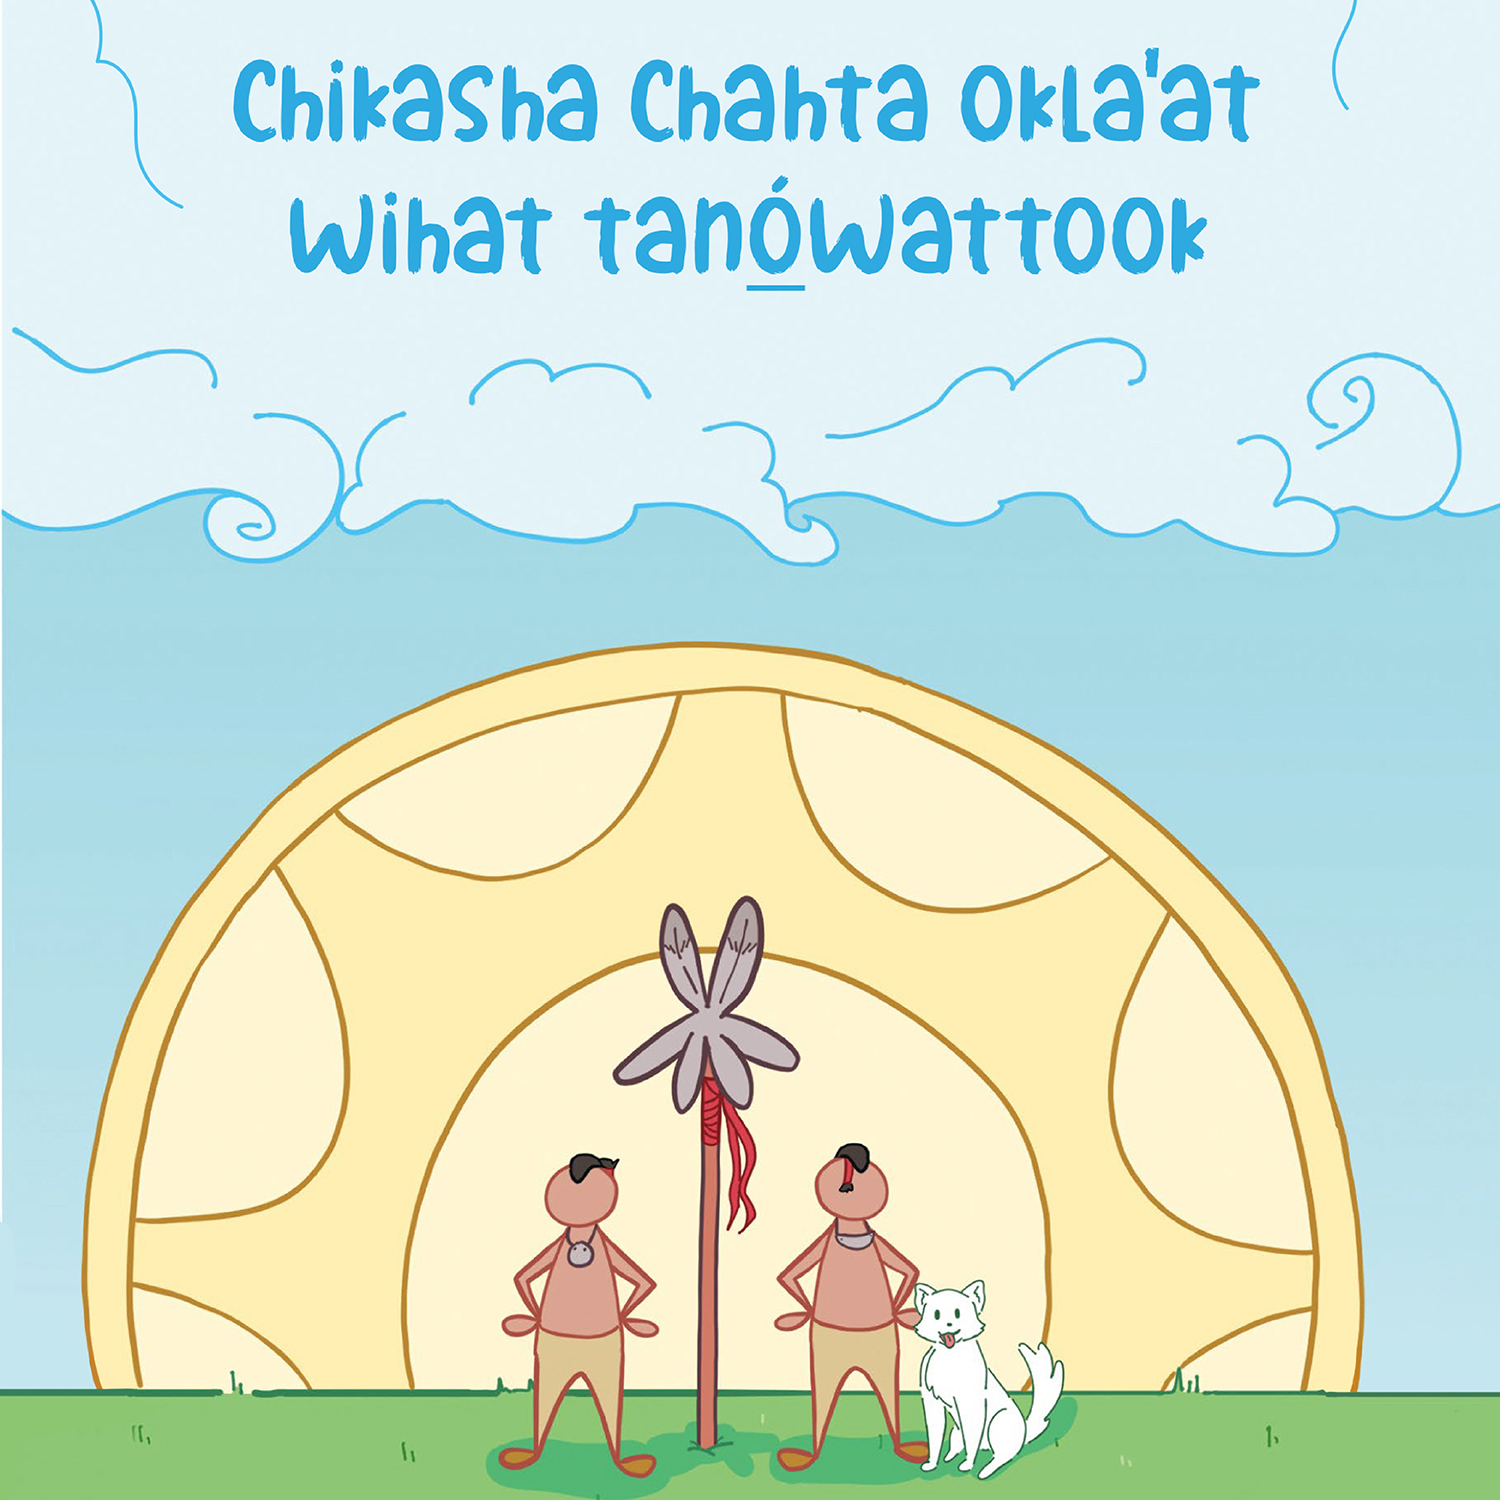 Chikasha Chahta' oklaat wihat tanó̲wattook (The Migration Story of the Chickasaw and Choctaw People)